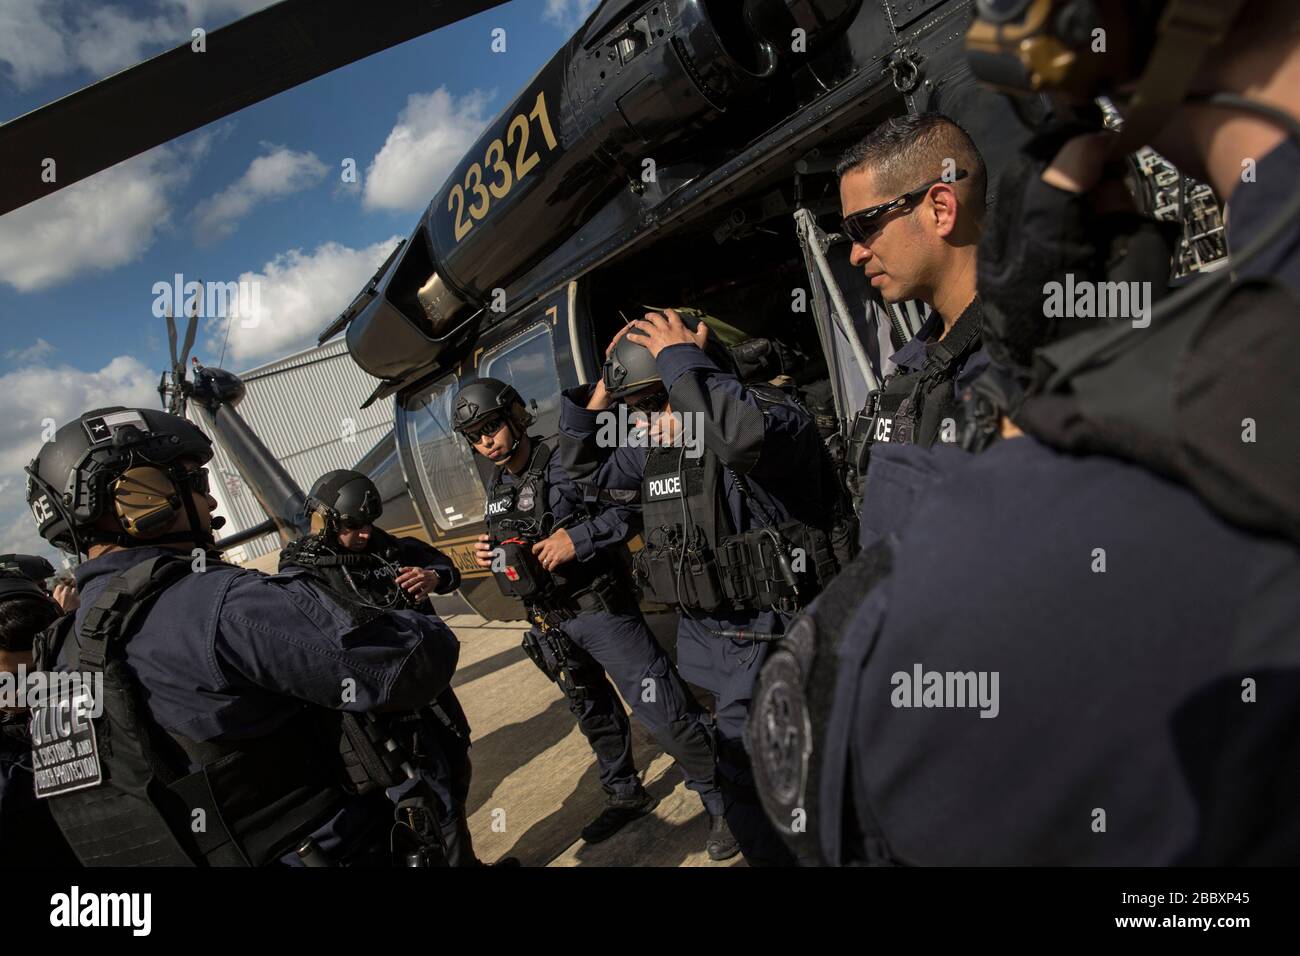 Members of the U.S. Customs and Border Protection, Office of Field Operations Special Response Team, gather outside an AMO UH-60 Black Hawk helicopter after an air-intercept training exercise as they provide airspace security for Super Bowl LI, in Conroe, Texas, Feb. 1, 2017. Units with Air and Marine Operations and Office of Field Operations teamed up with the Civil Air Patrol  to practice an air-to-air intercept using two AMO UH-60 Black Hawk helicopters and two C-550 Citation jets to track down a simulated incursion into restricted airspace. Stock Photo